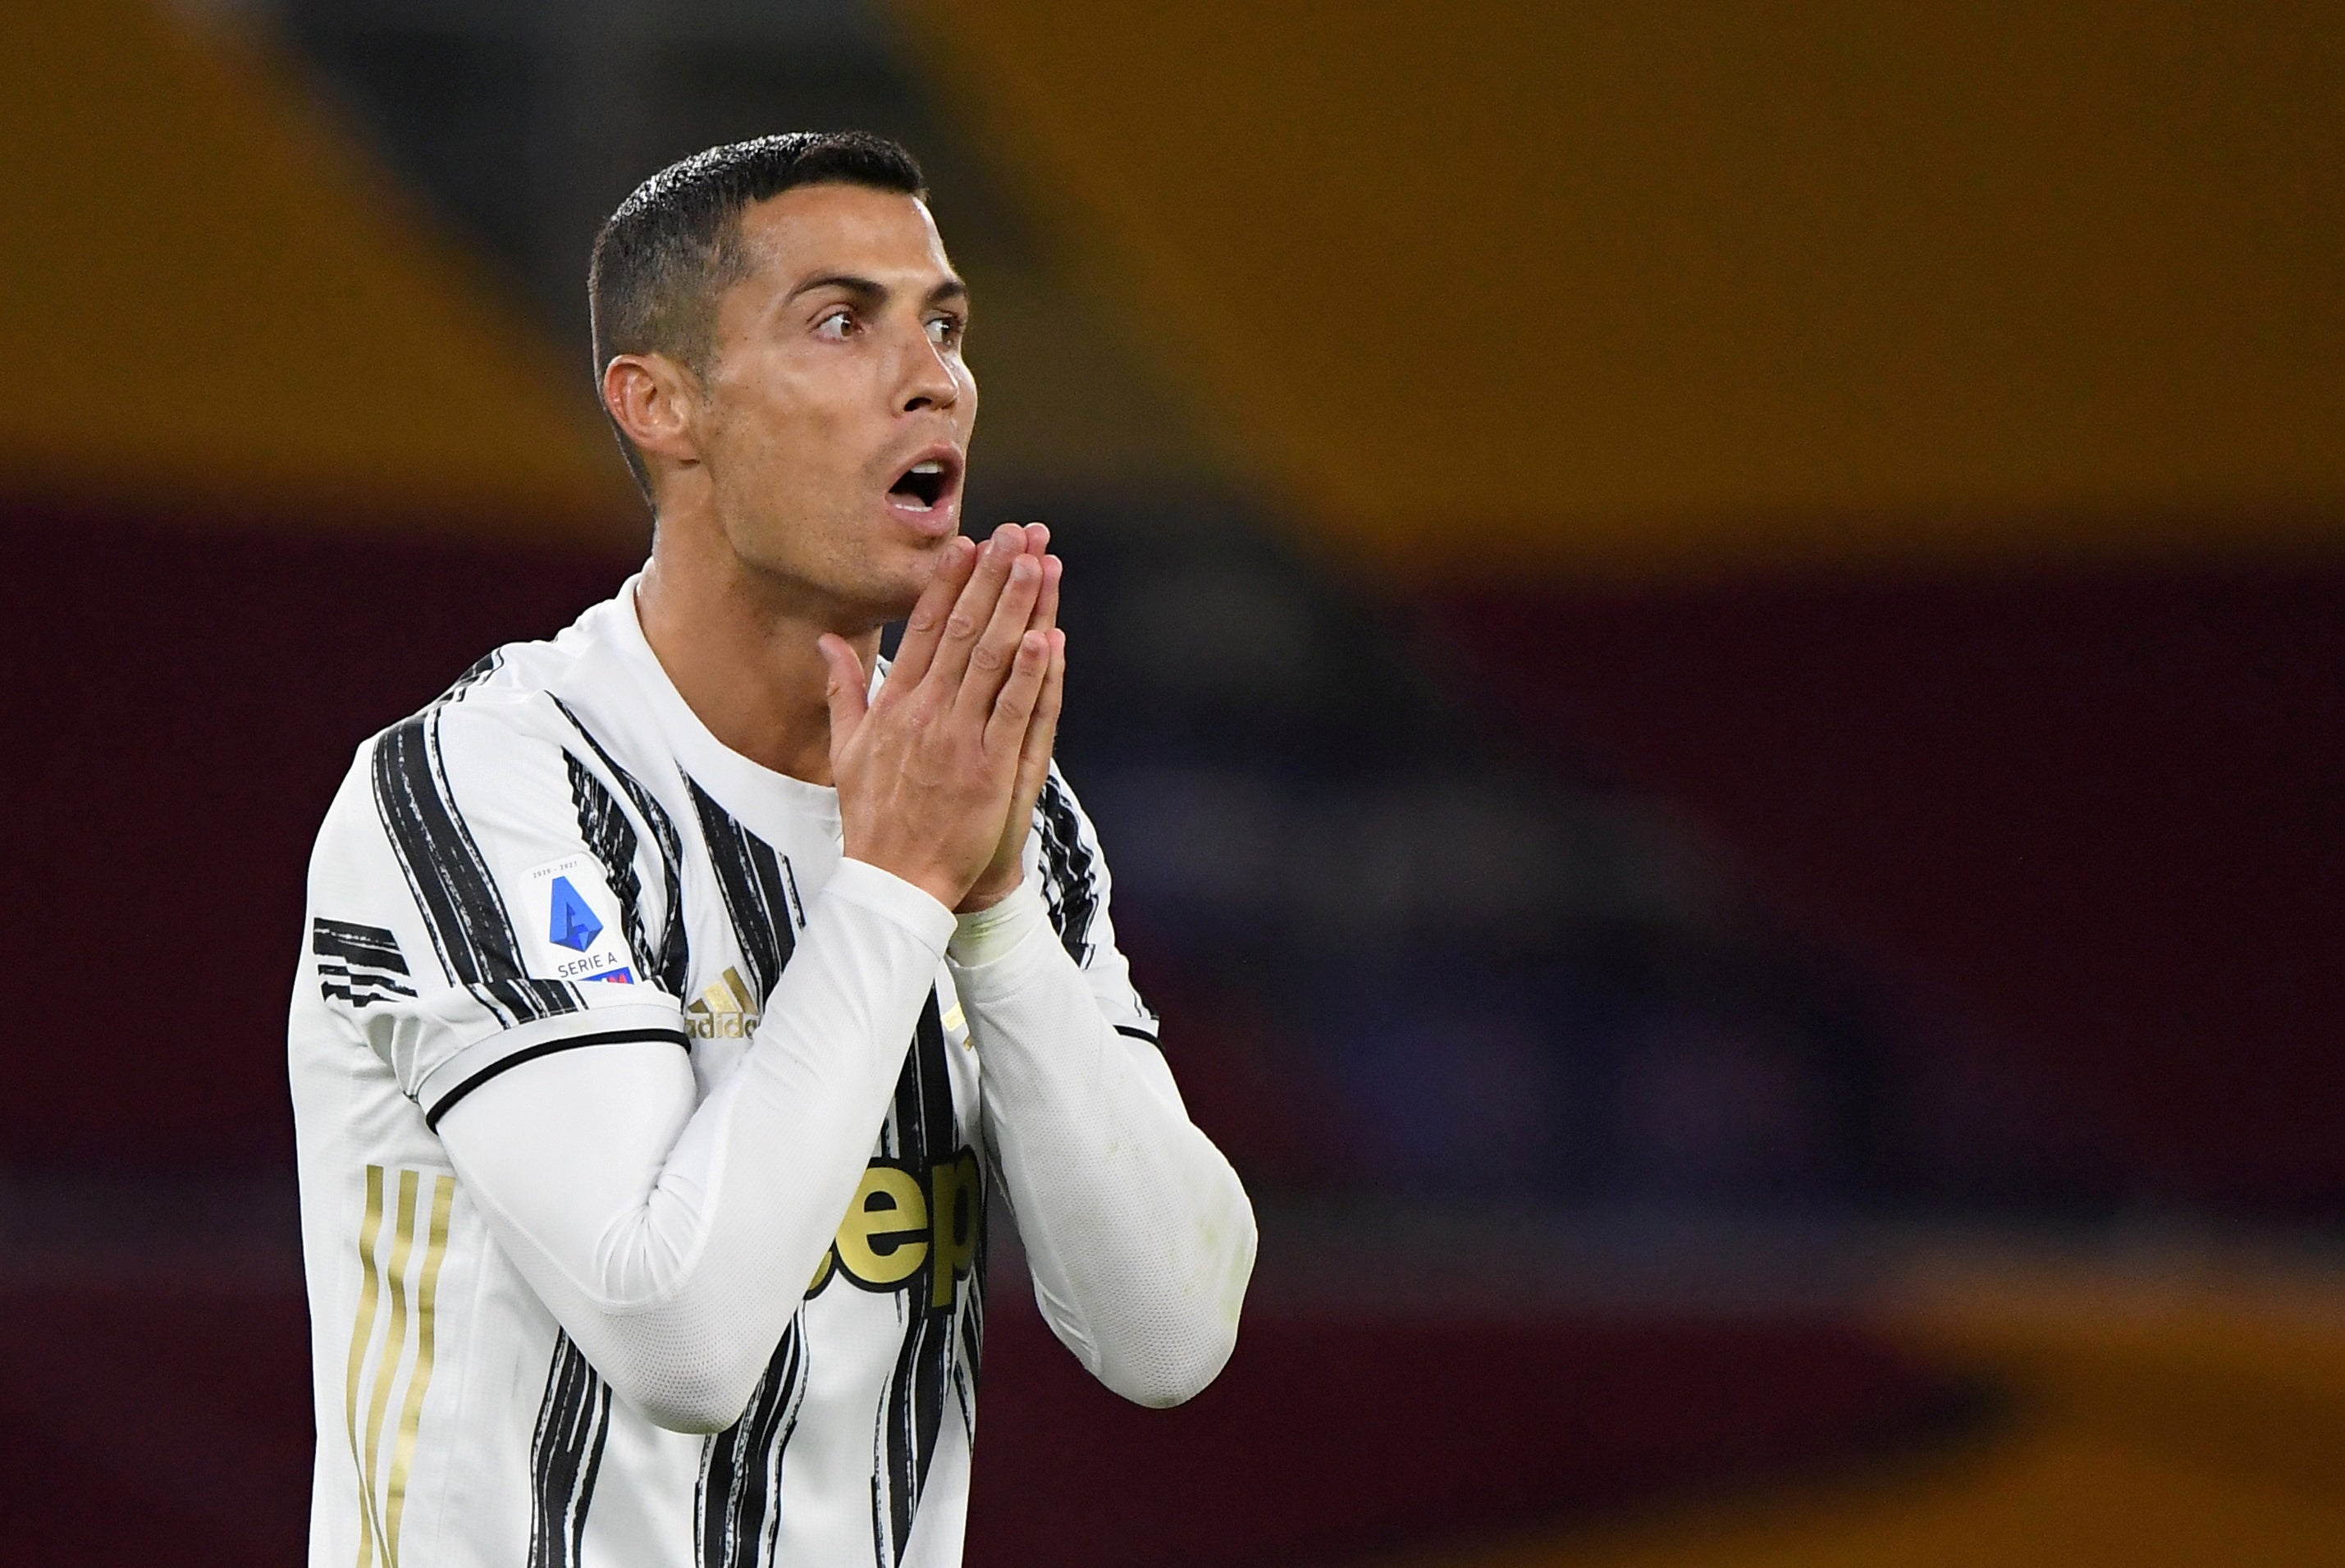 Cristiano Ronaldo may have broken Italian health rules by travelling home from Portugal, according to the health minister